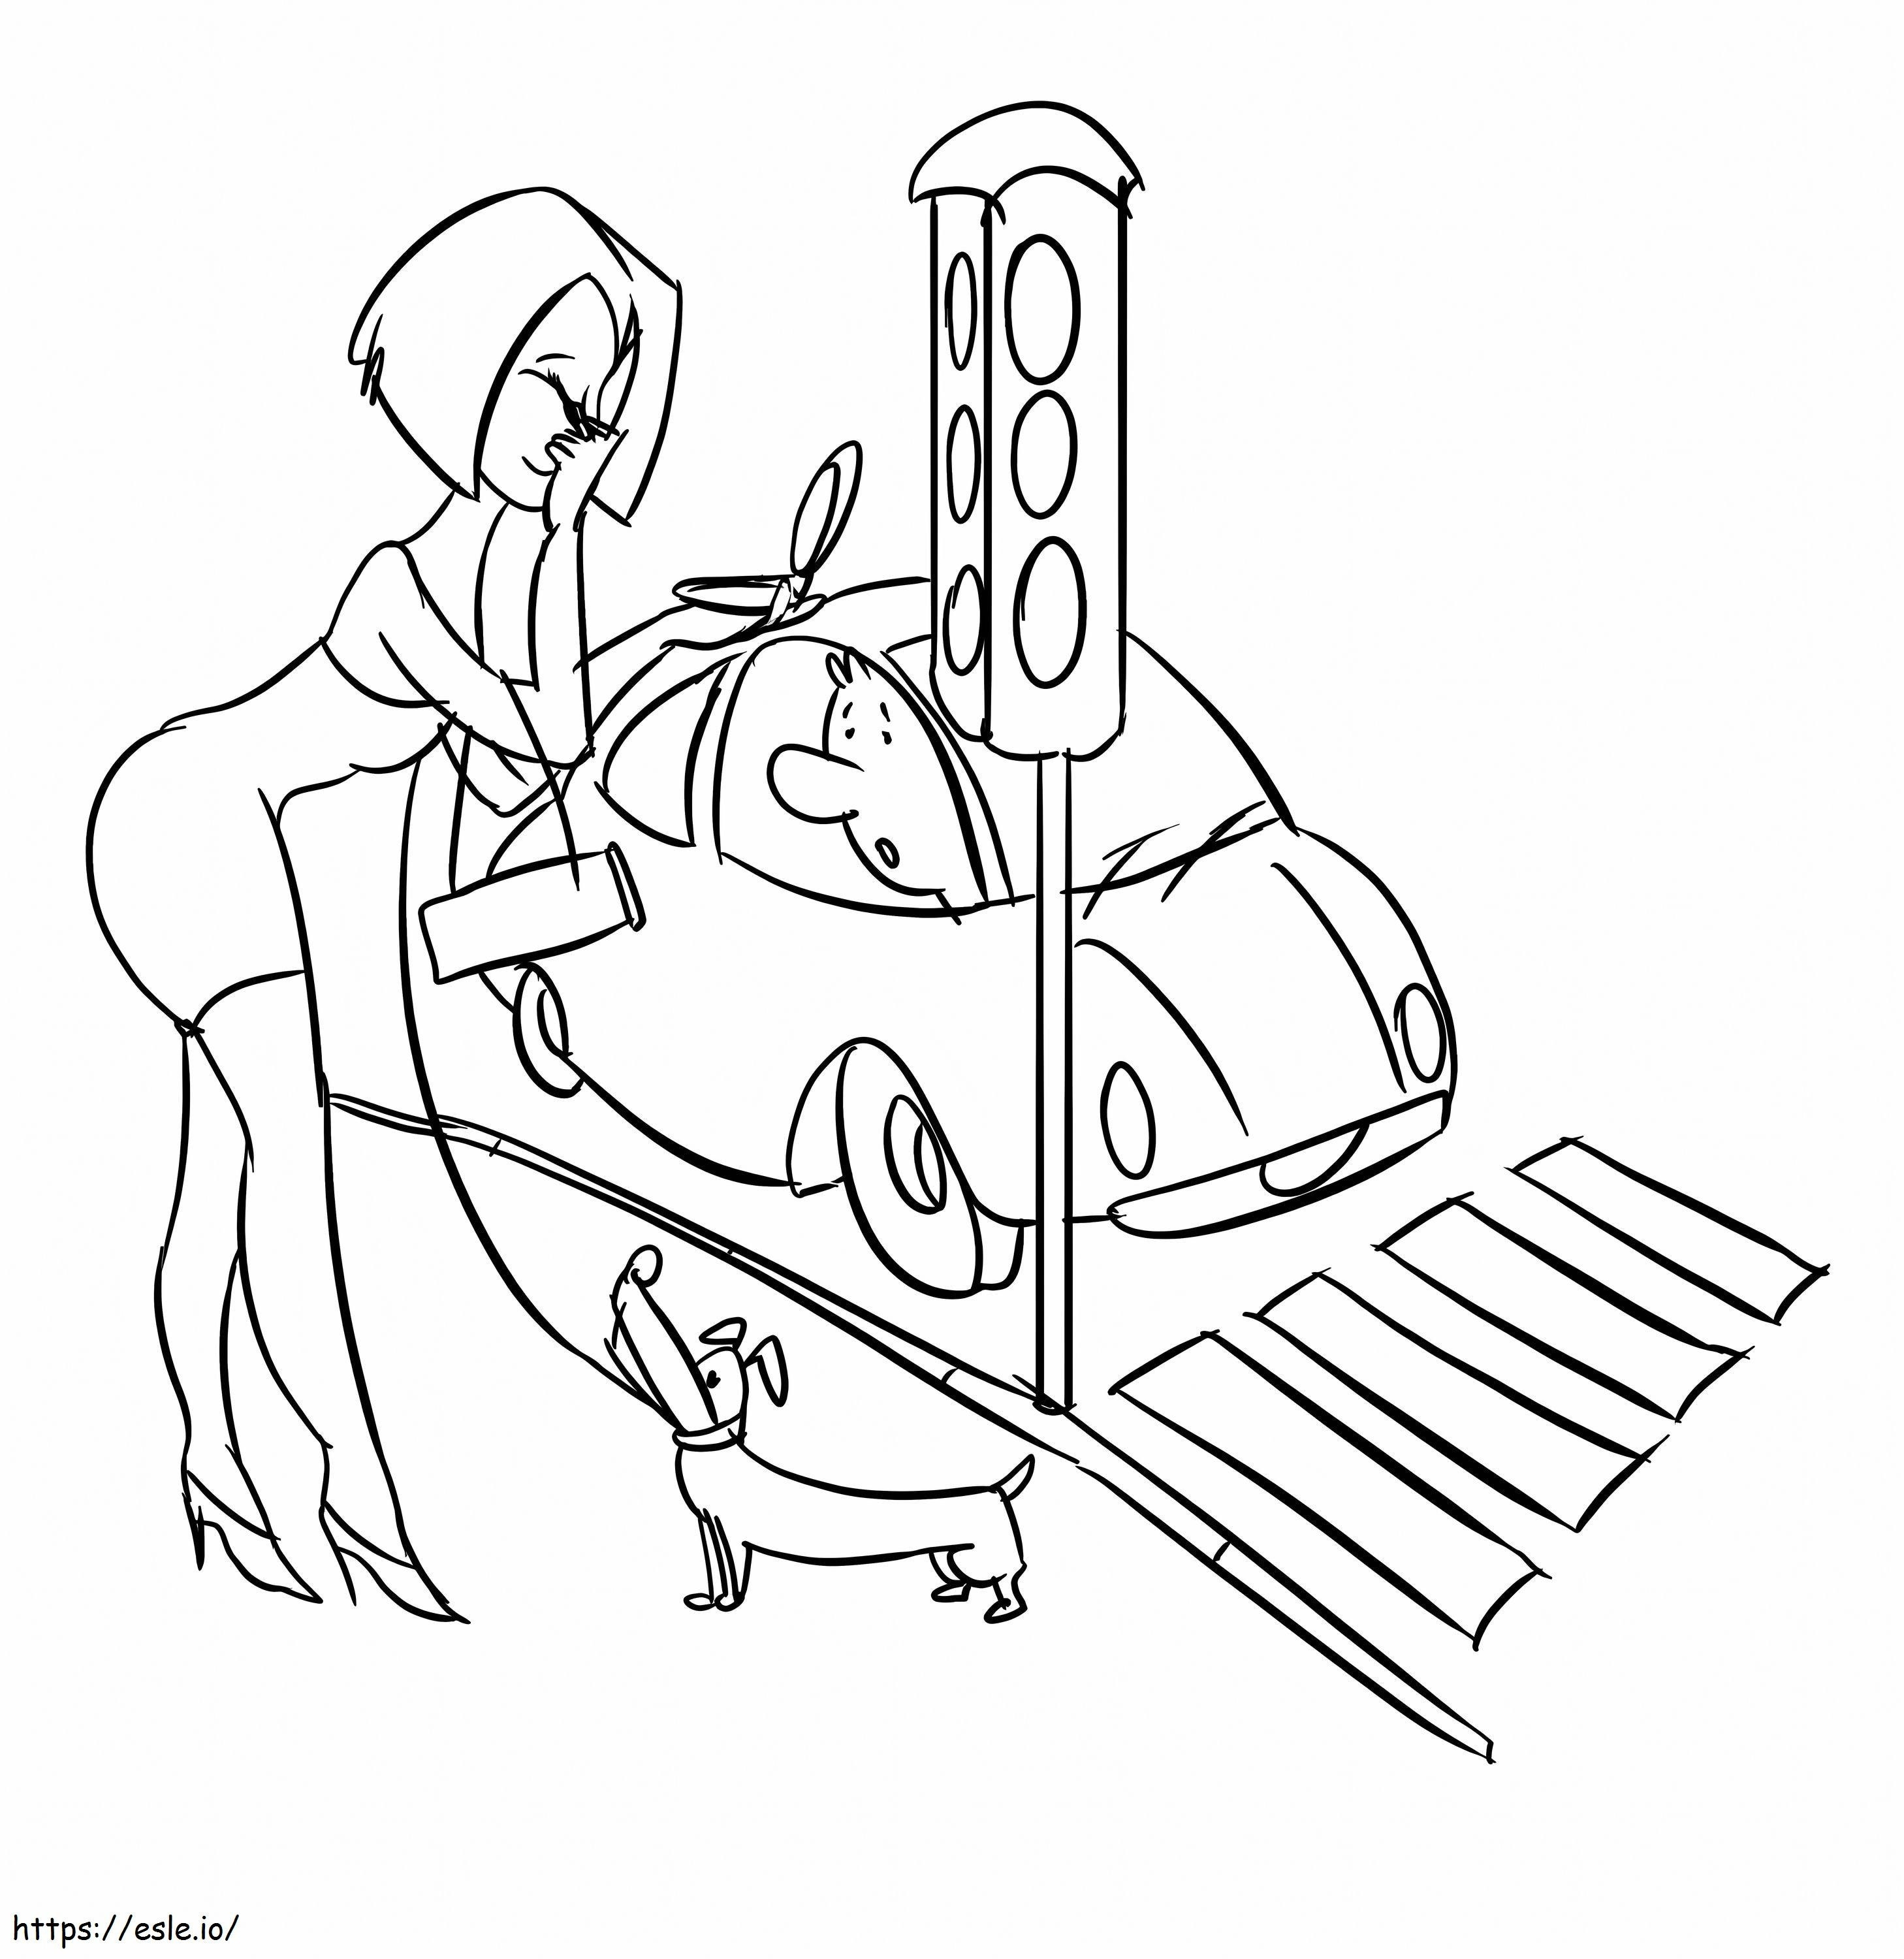 Girl And Car With Traffic Light coloring page